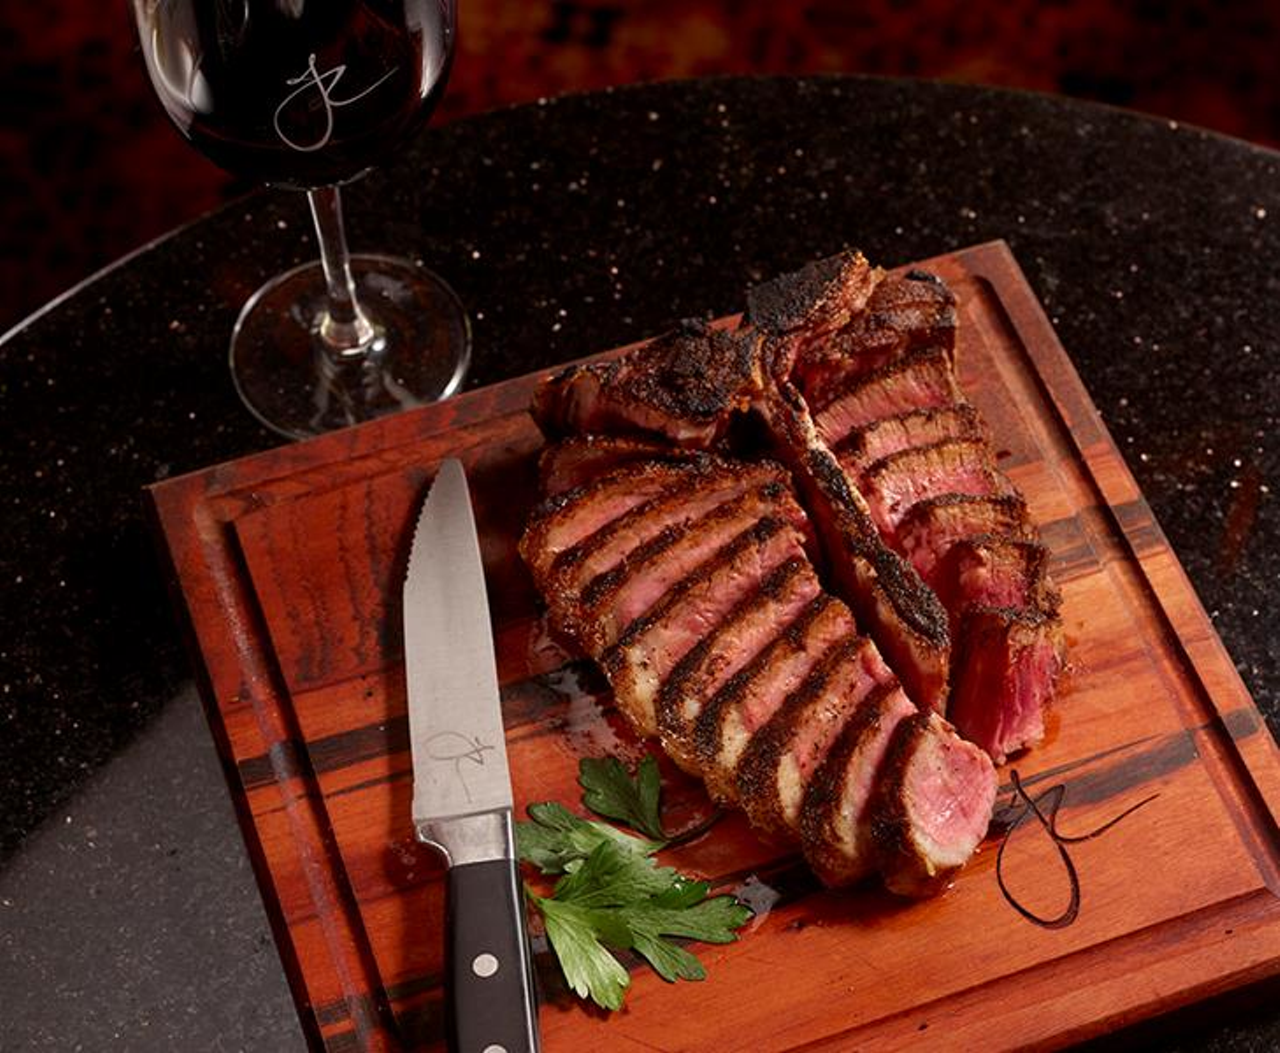 No. 6 Overall Restaurant: Jeff Ruby’s Steakhouse
505 Vine St., Downtown